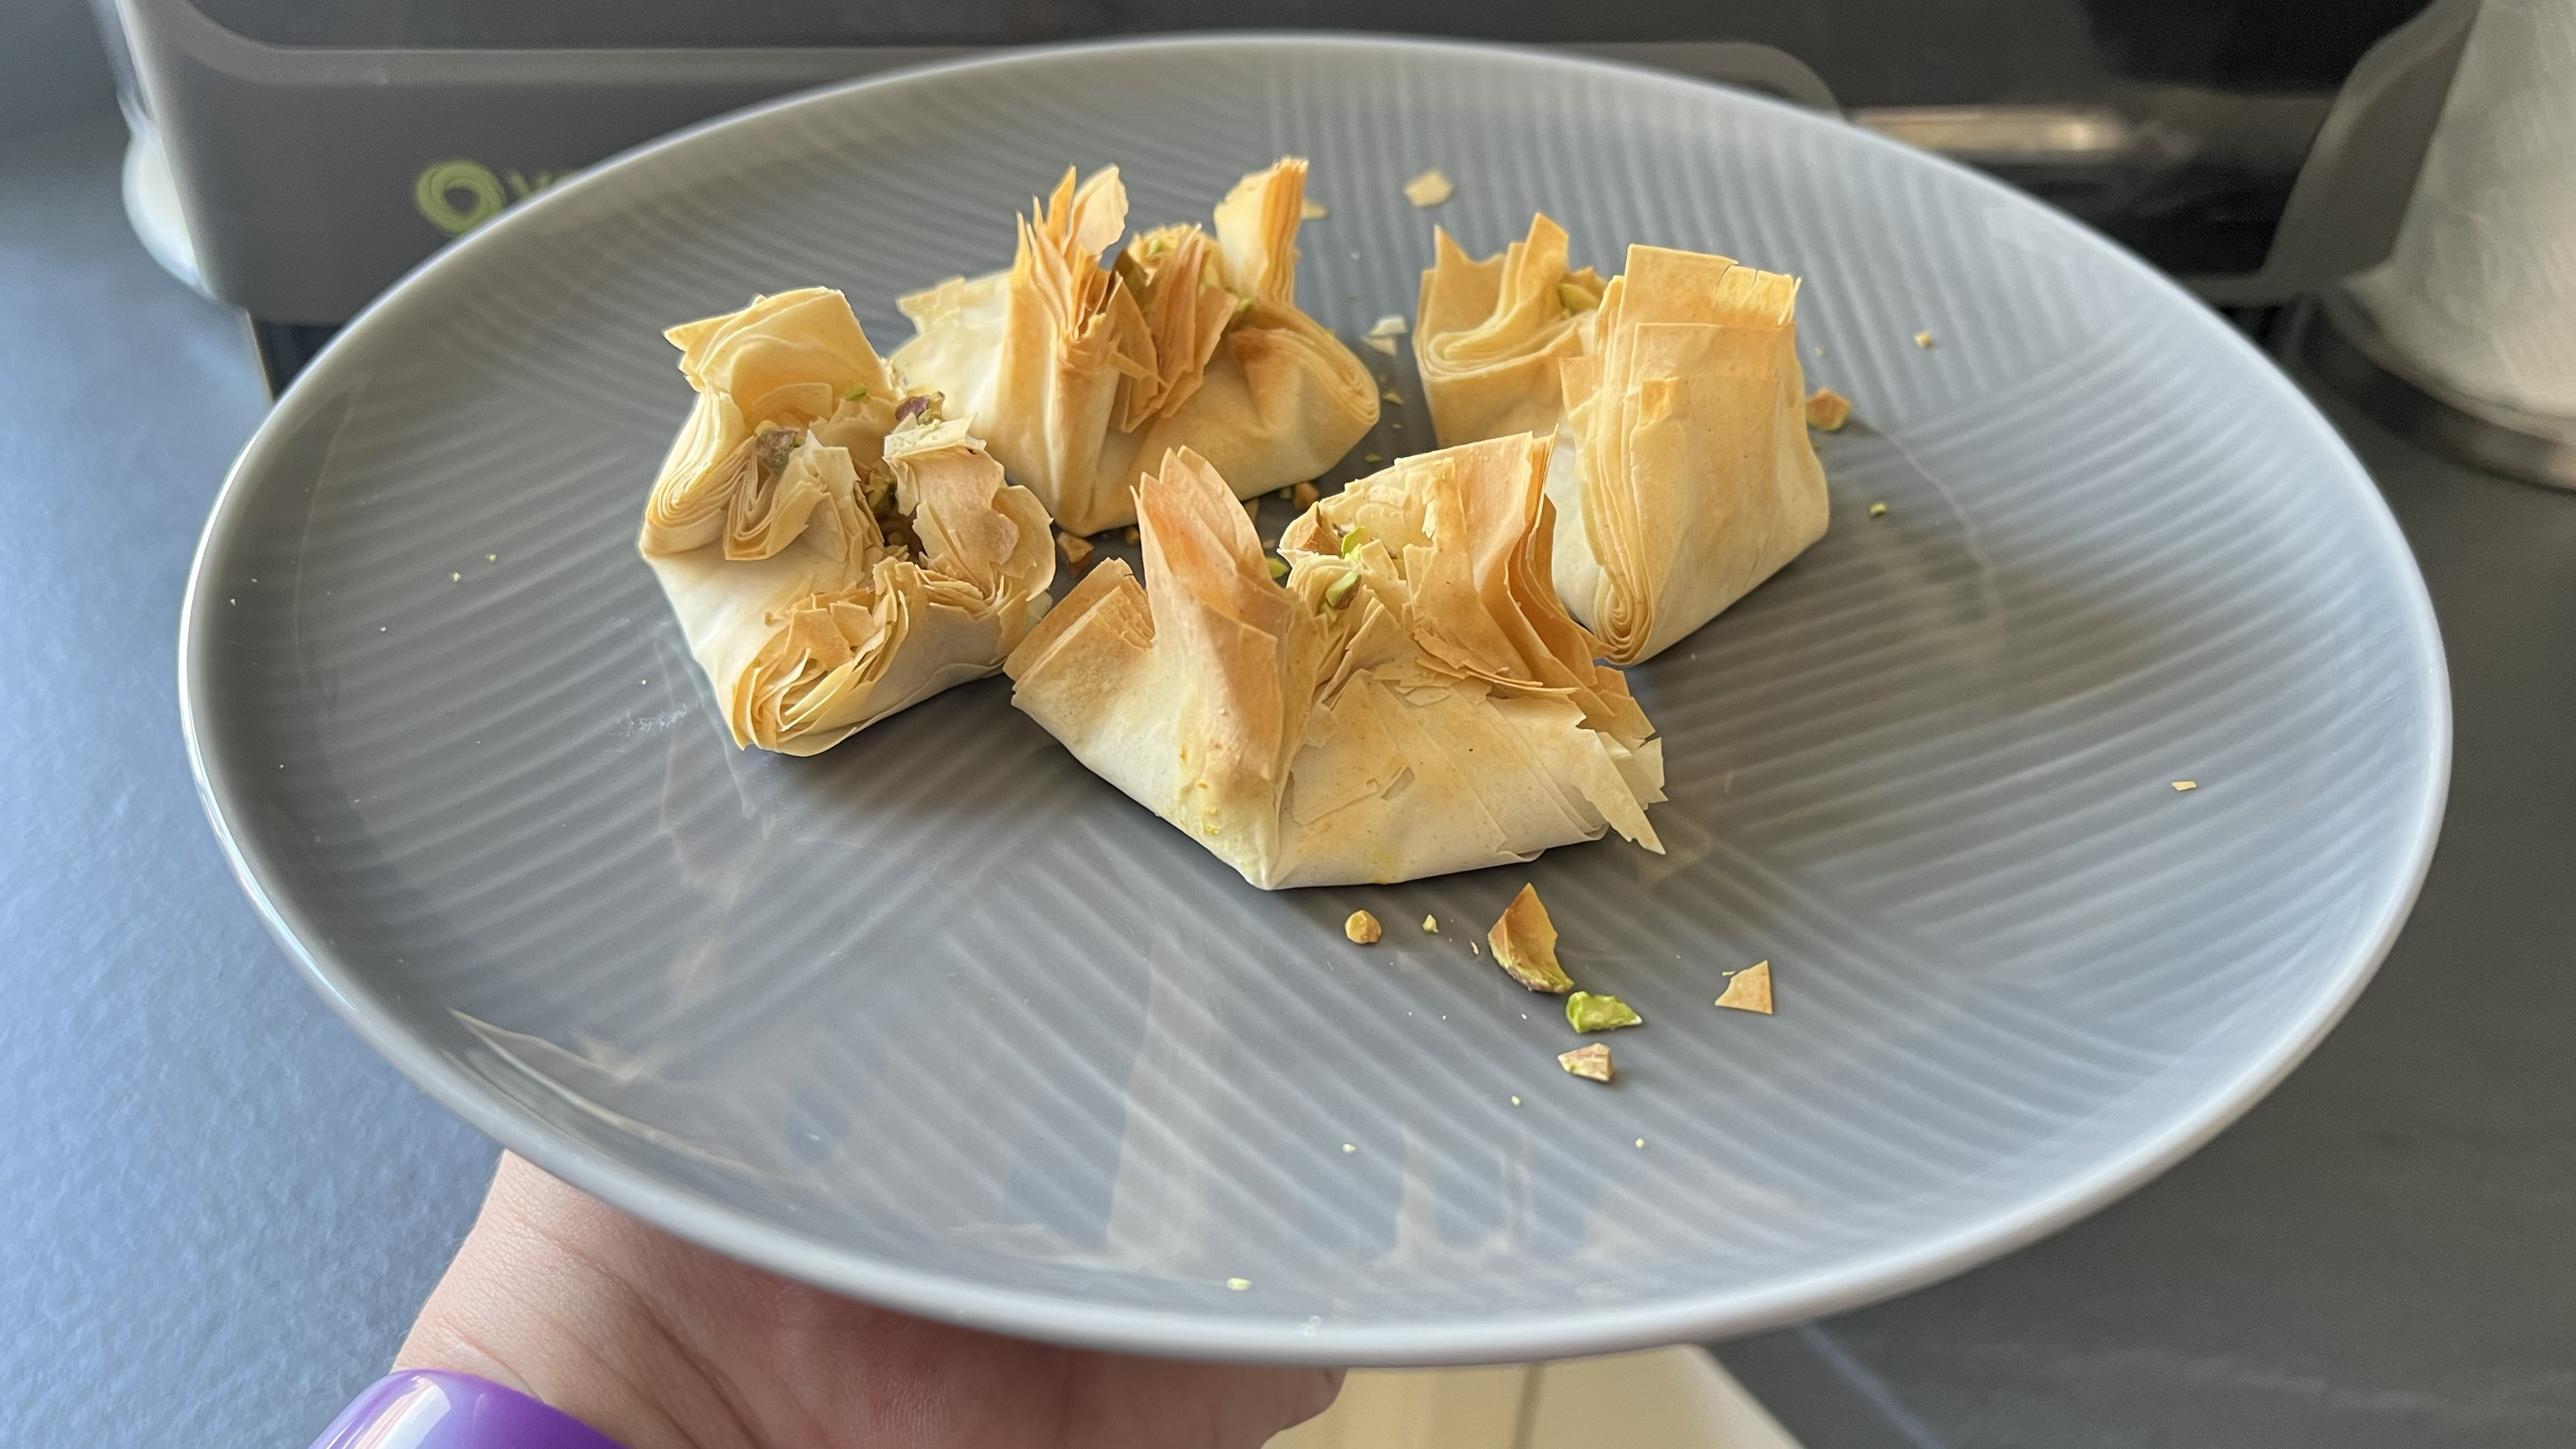 These air fryer filo pastry baklava bites are great for parties | TechRadar